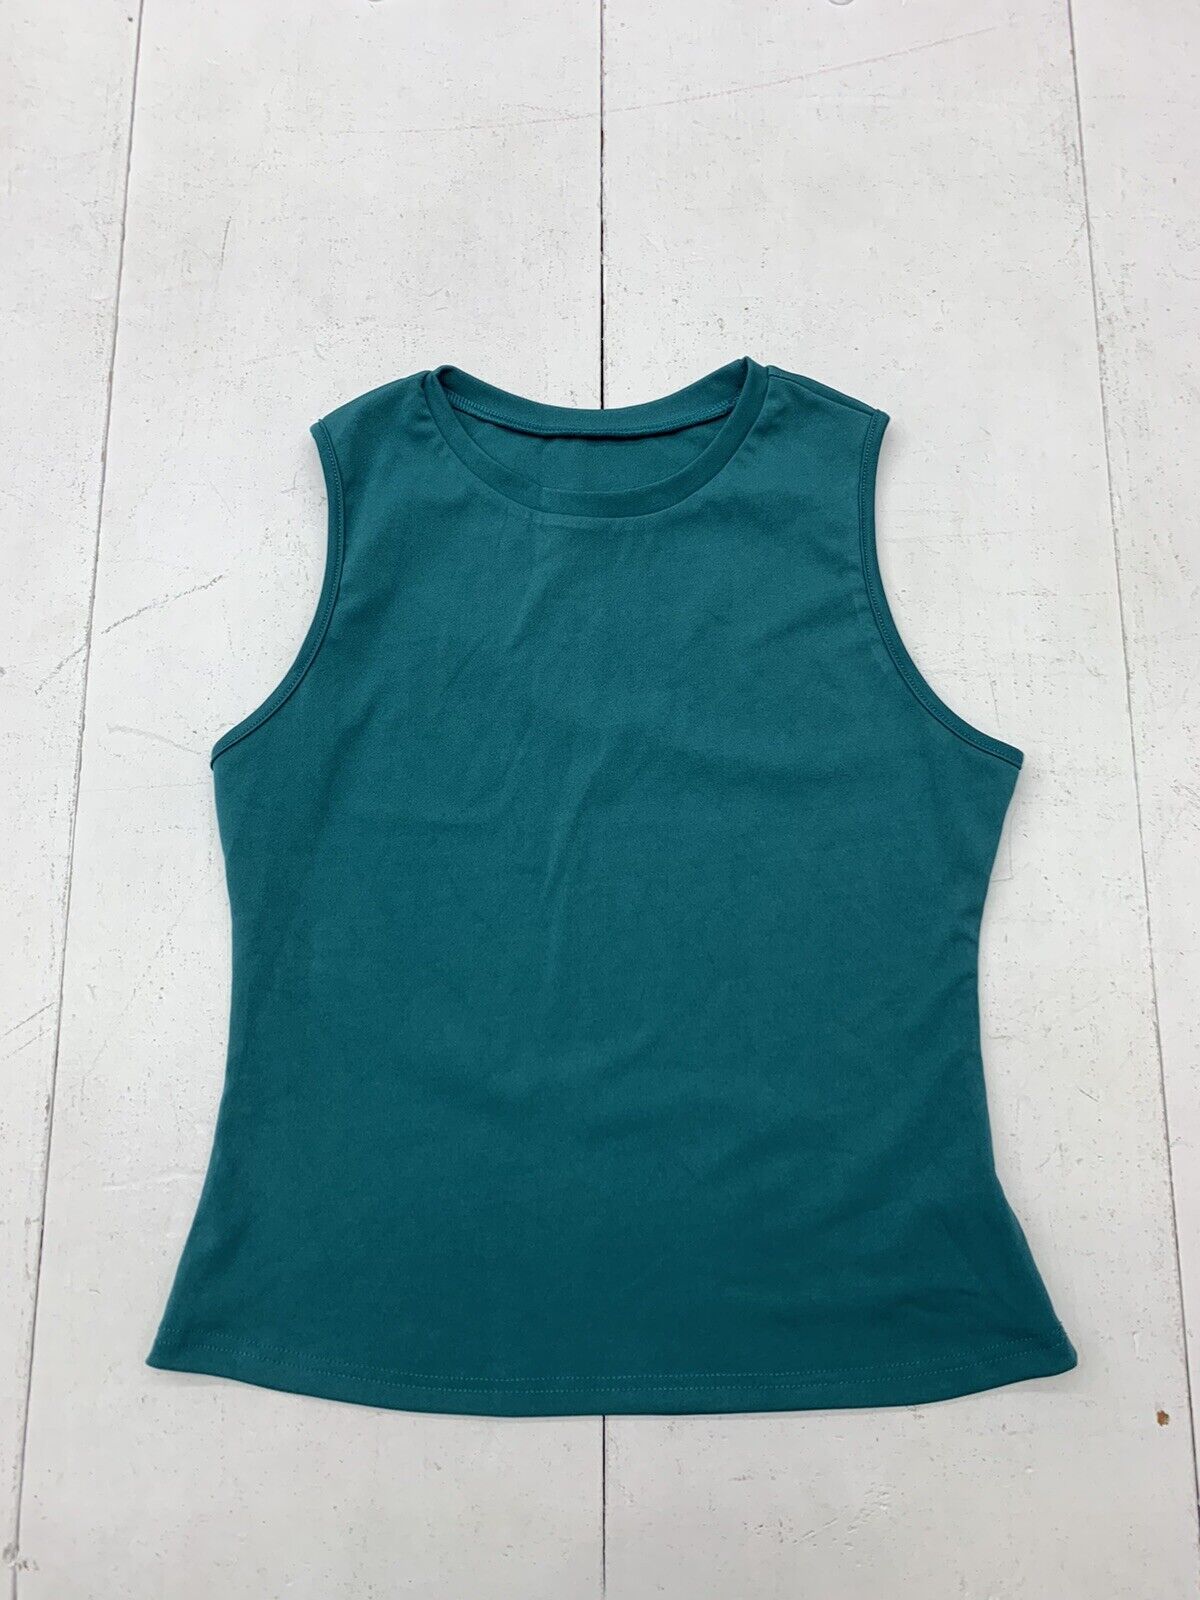 Unbranded Womens Real Athletic Tank Size XL - beyond exchange